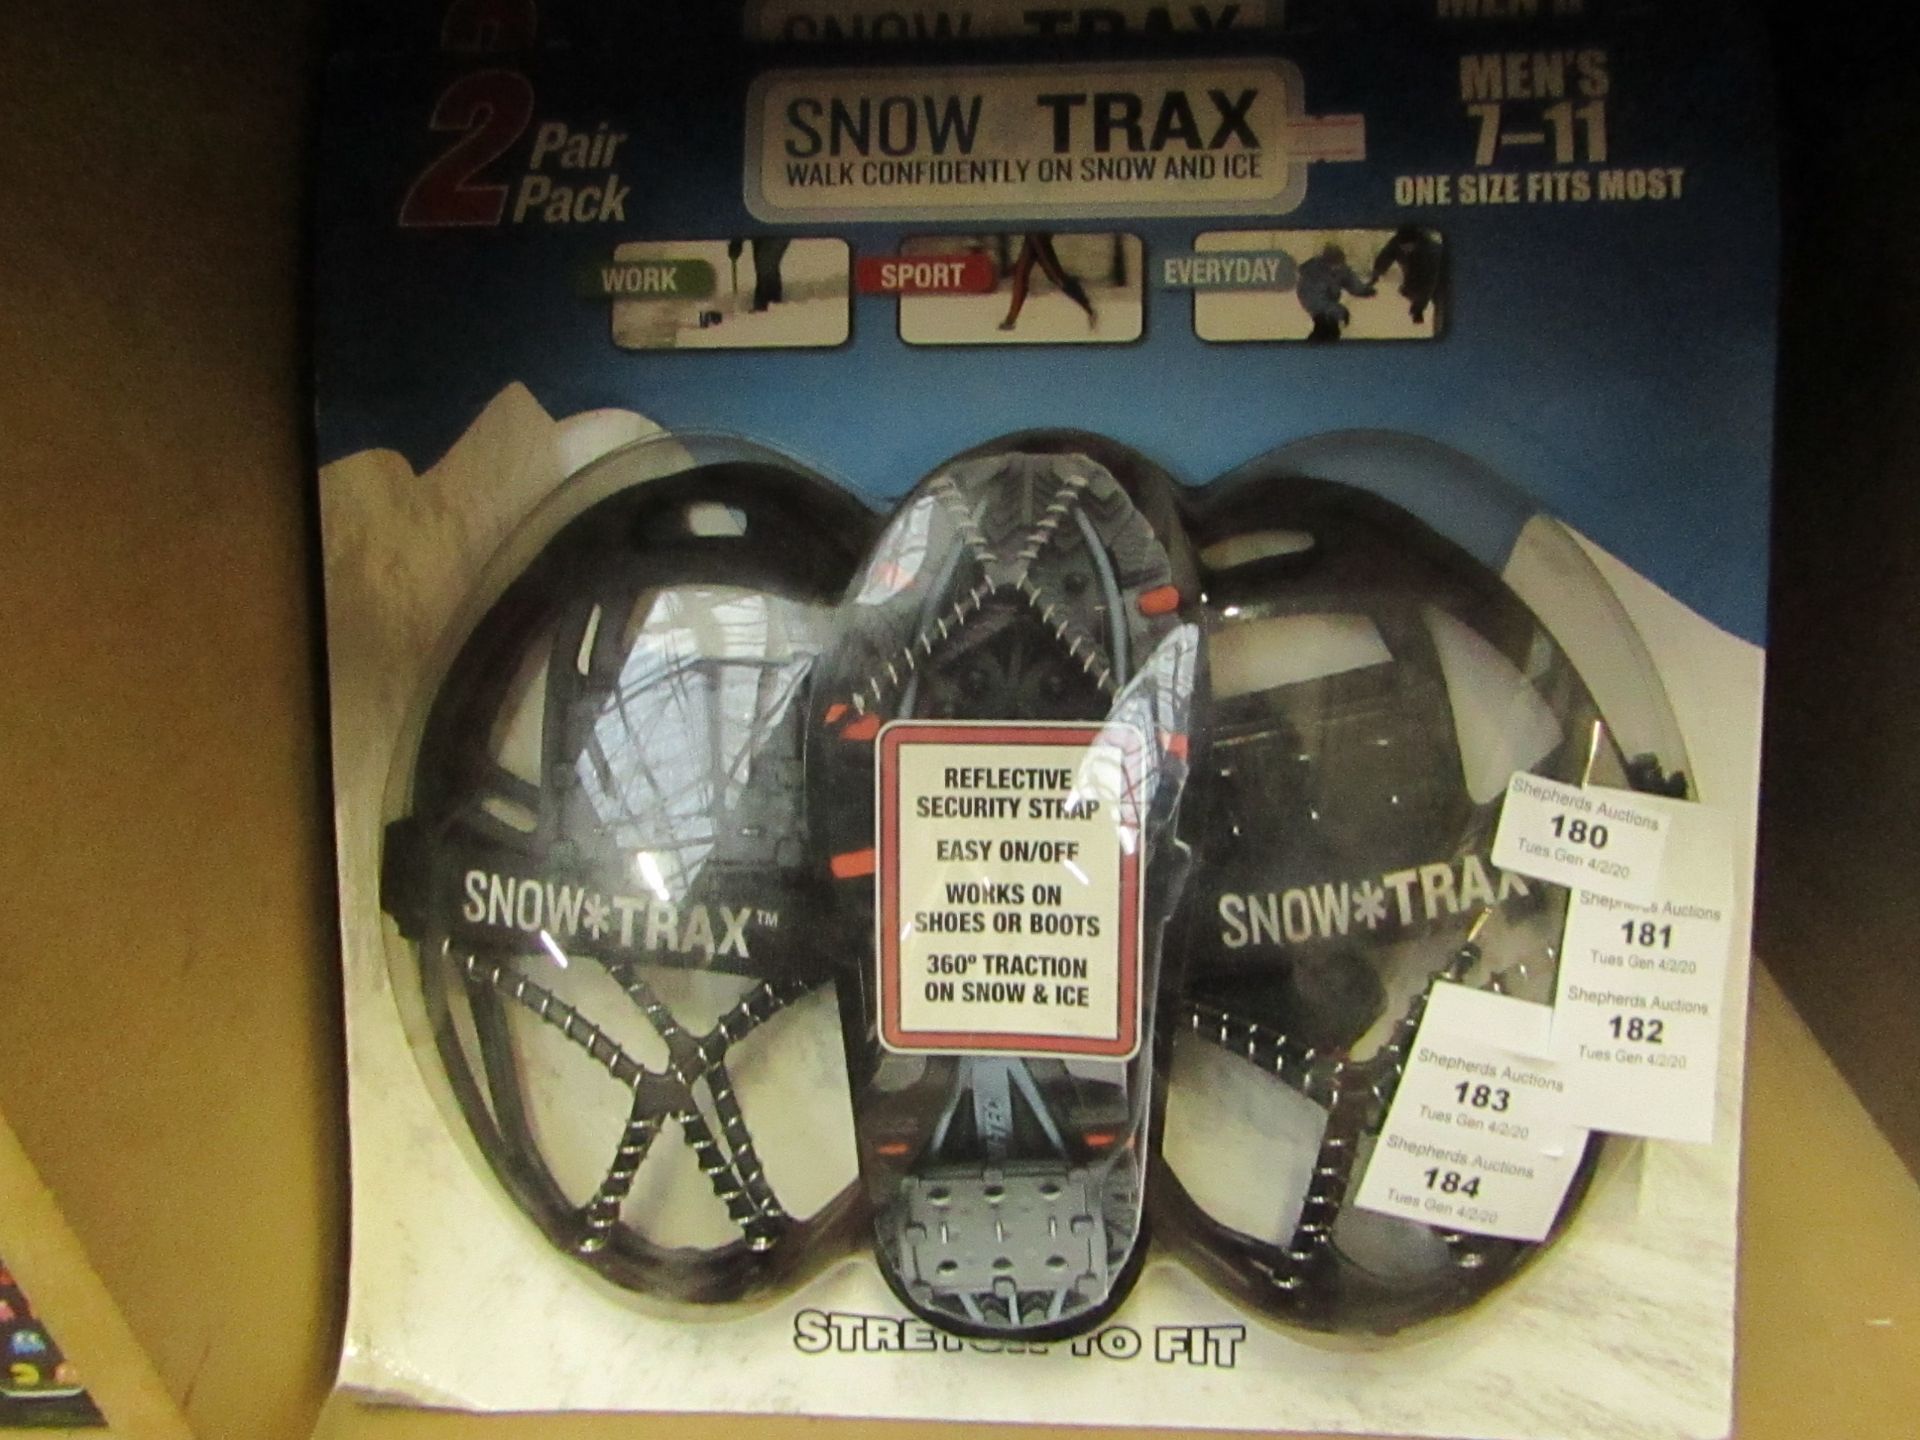 Snow Trax - Men's size 7-11 - All New and Packaged.